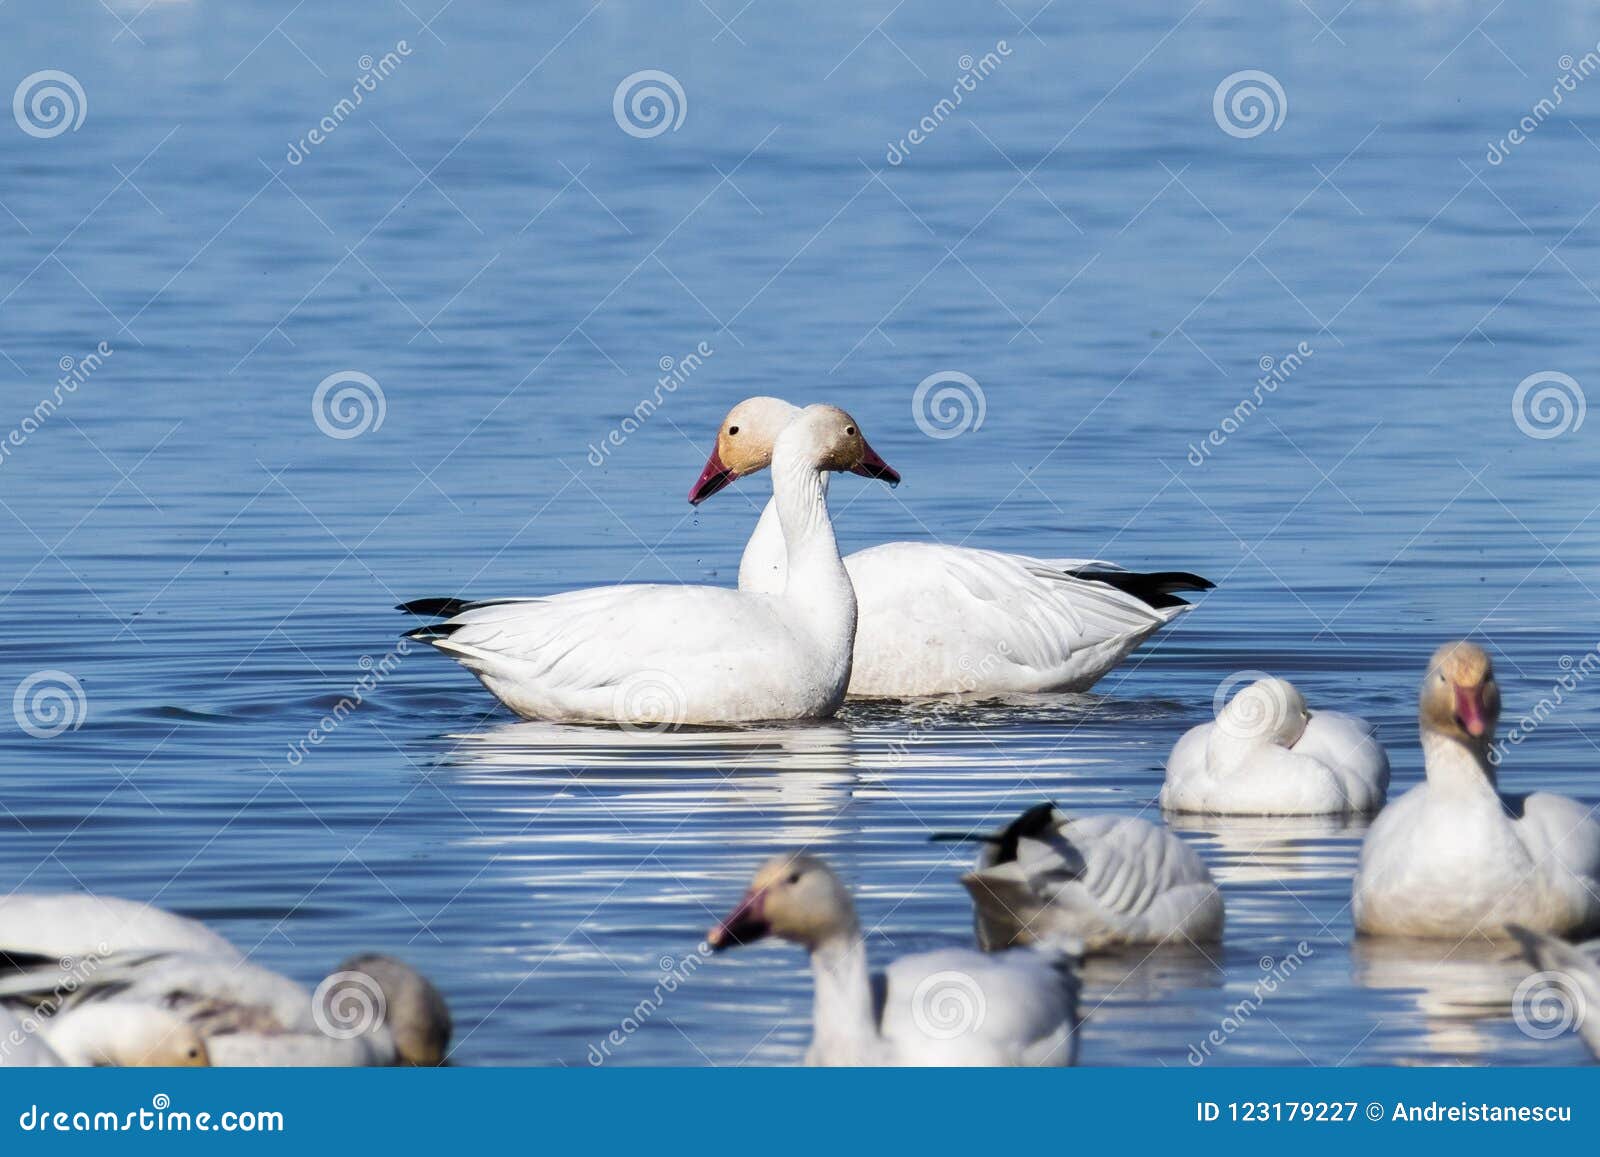 snow geese chen caerulescens swimming on a pond